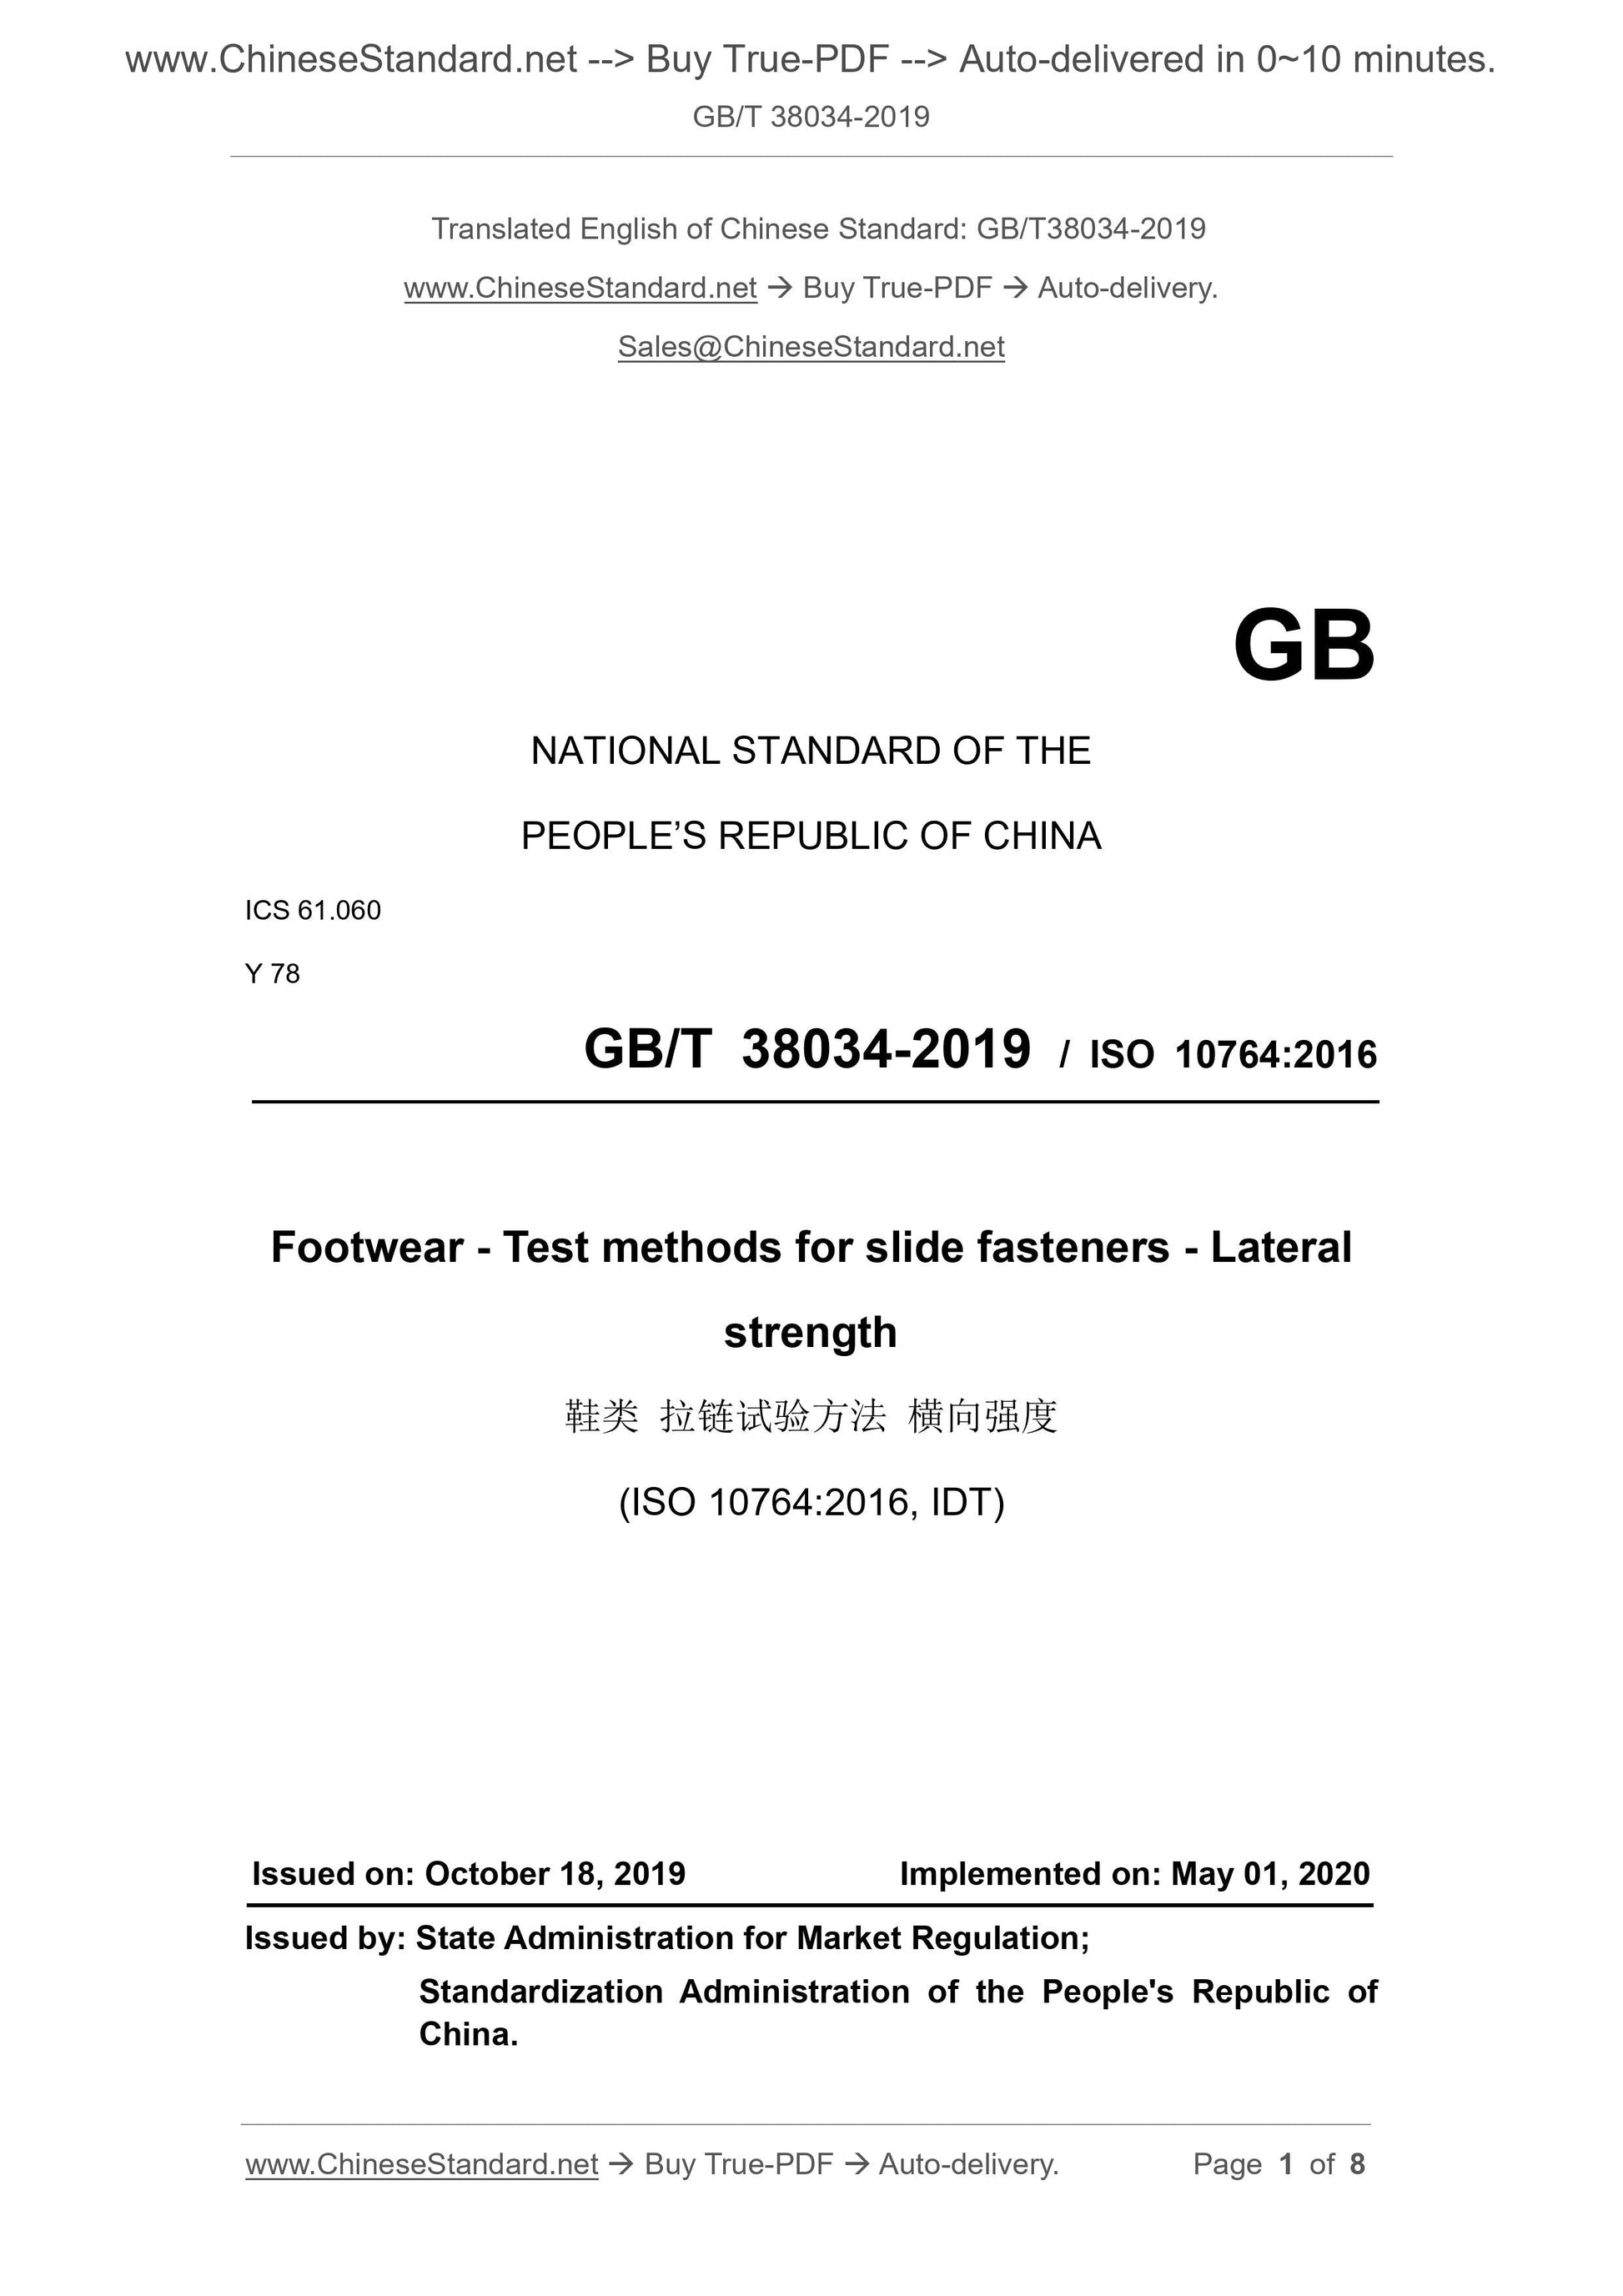 GB/T 38034-2019 Page 1